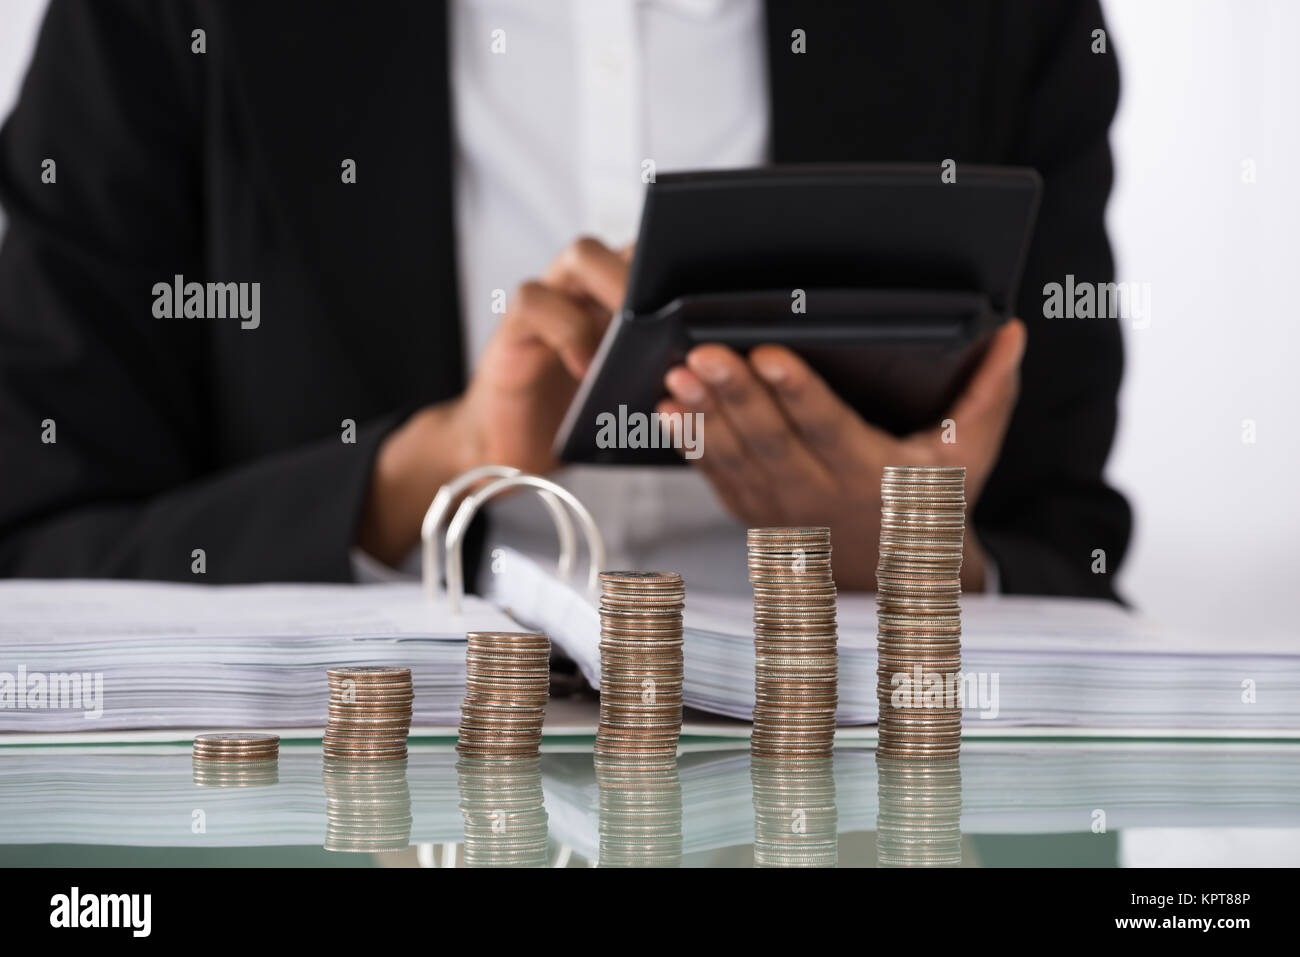 Businesswoman Calculating Invoice With Coins On Desk Stock Photo